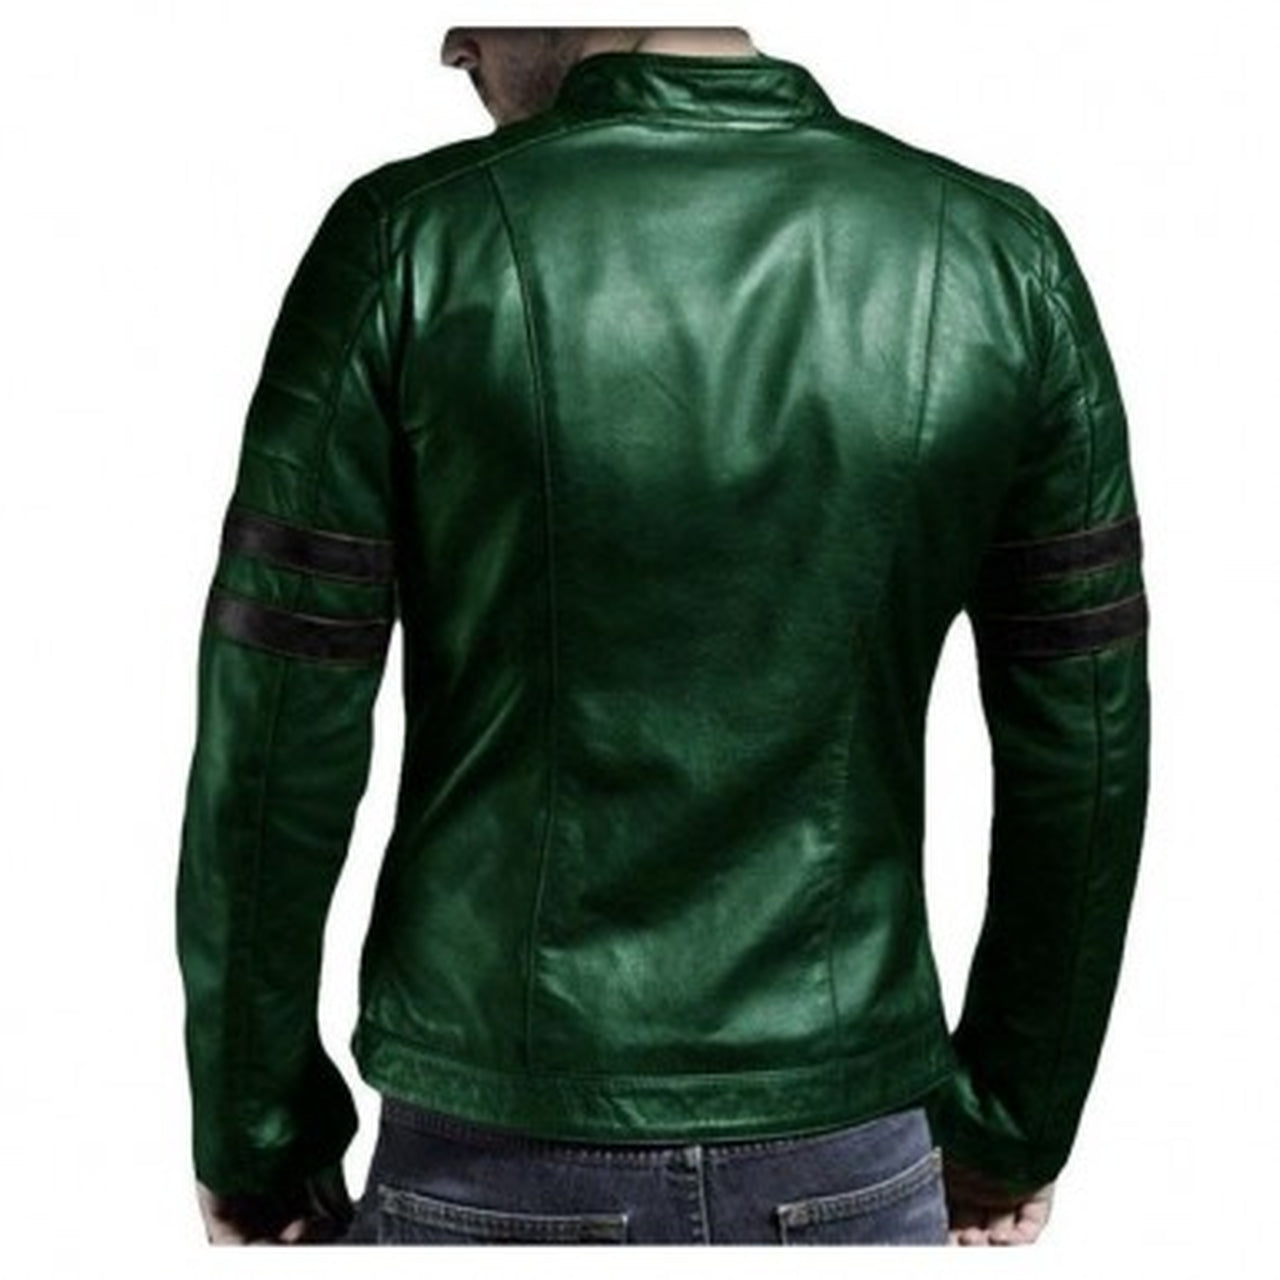 Genuine Leather Jacket For Winter In Green with Black Strip